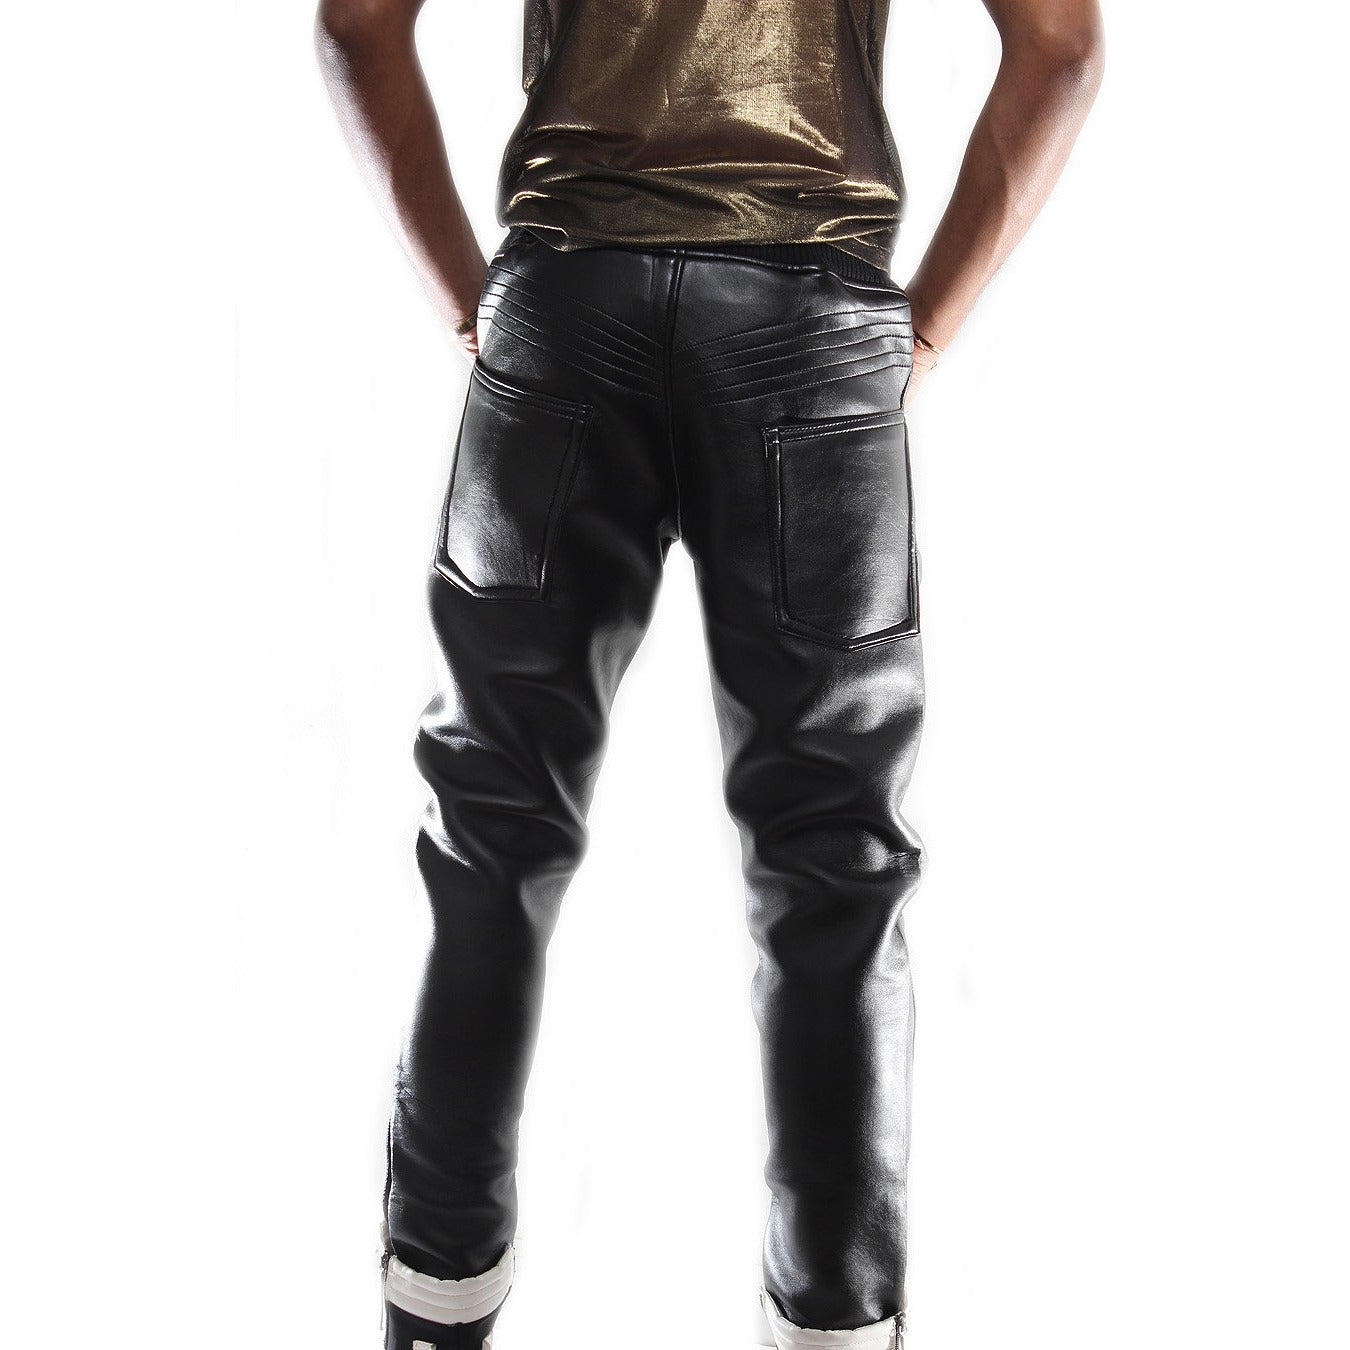 Custom Black leather trouser with waist band